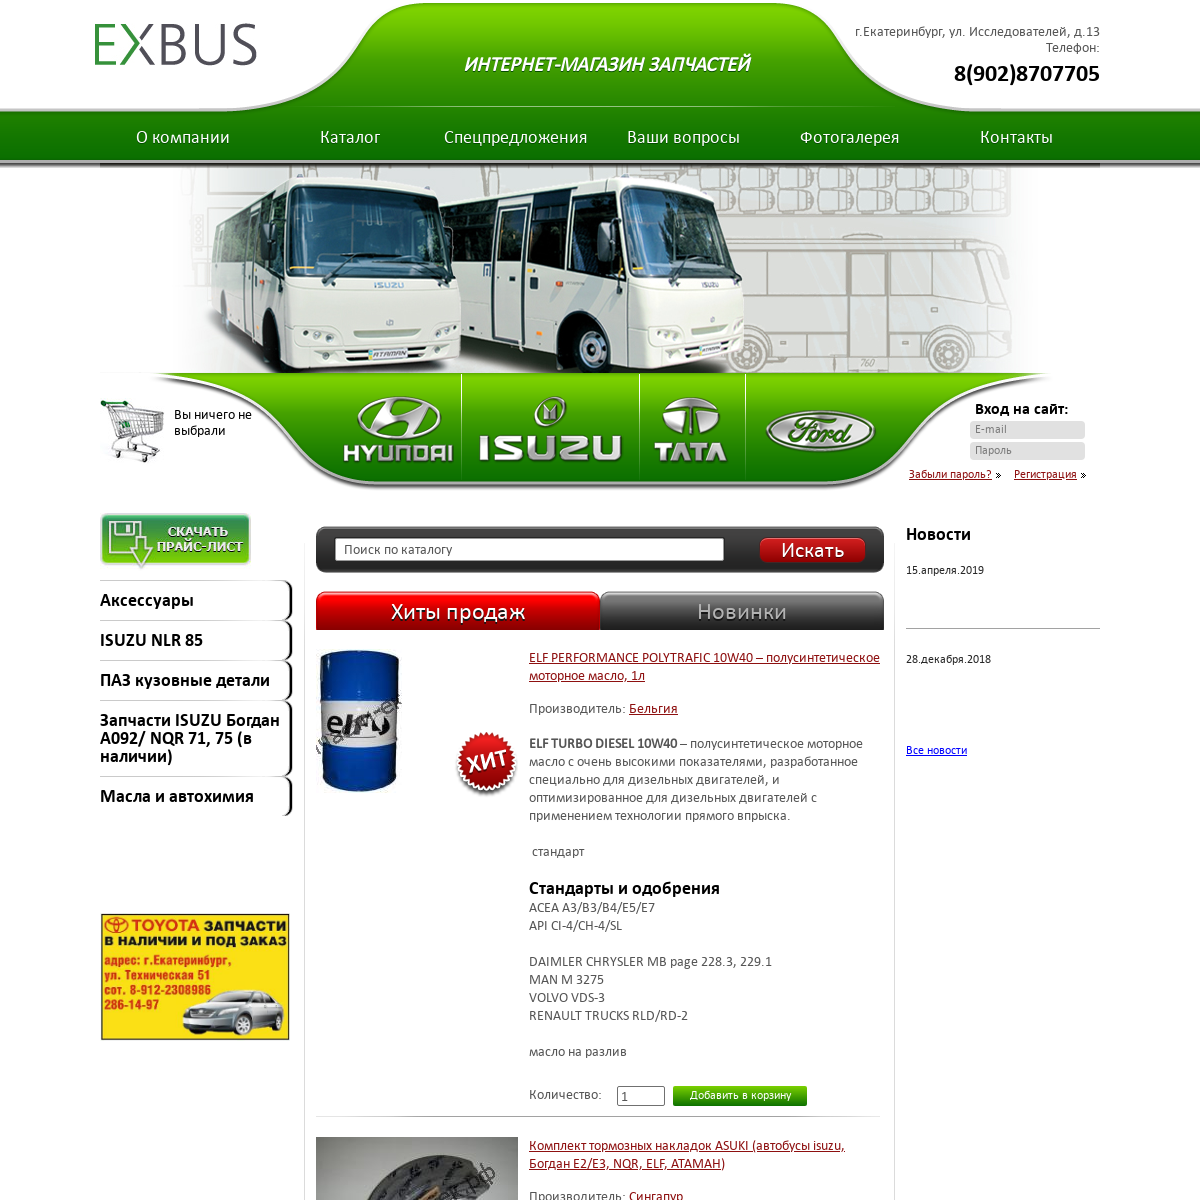 A complete backup of exbus.ru